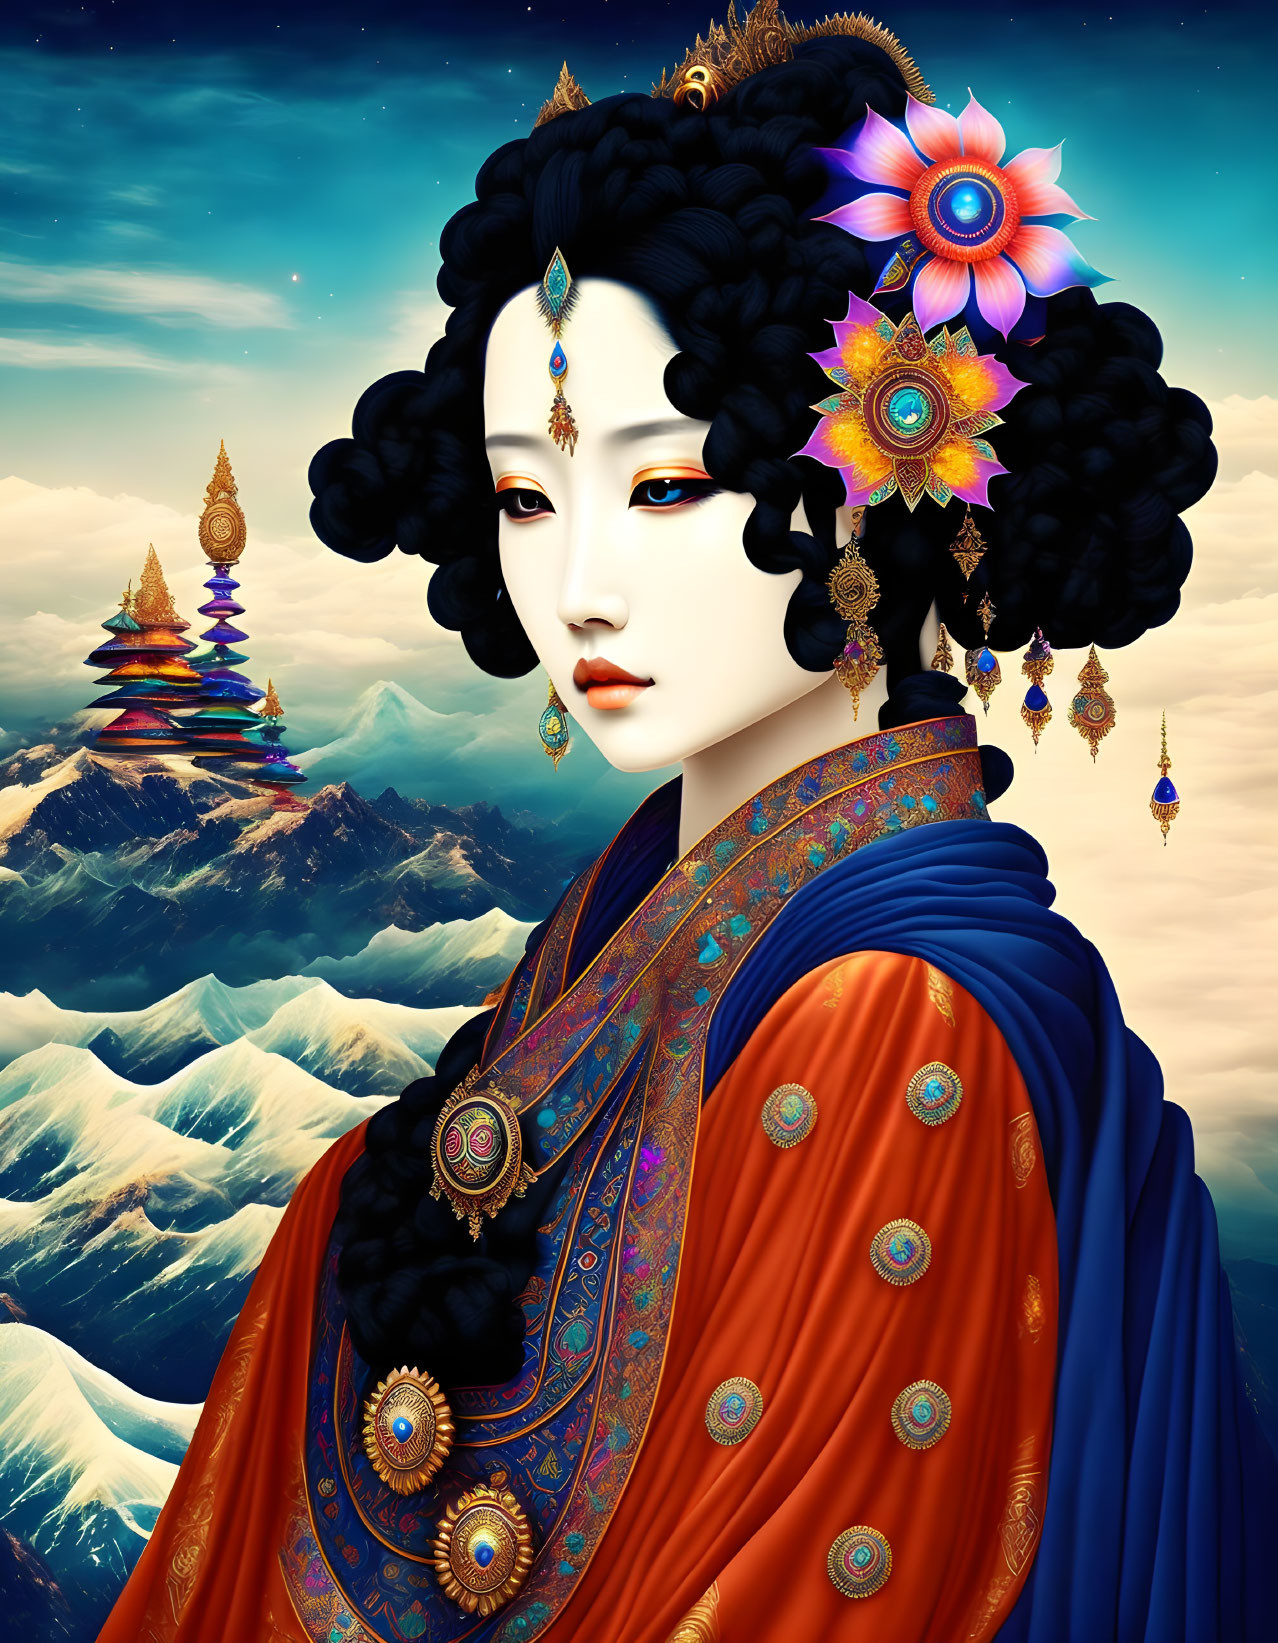 Detailed illustration of person with intricate hair decorations and traditional attire against mountain and pagoda backdrop.